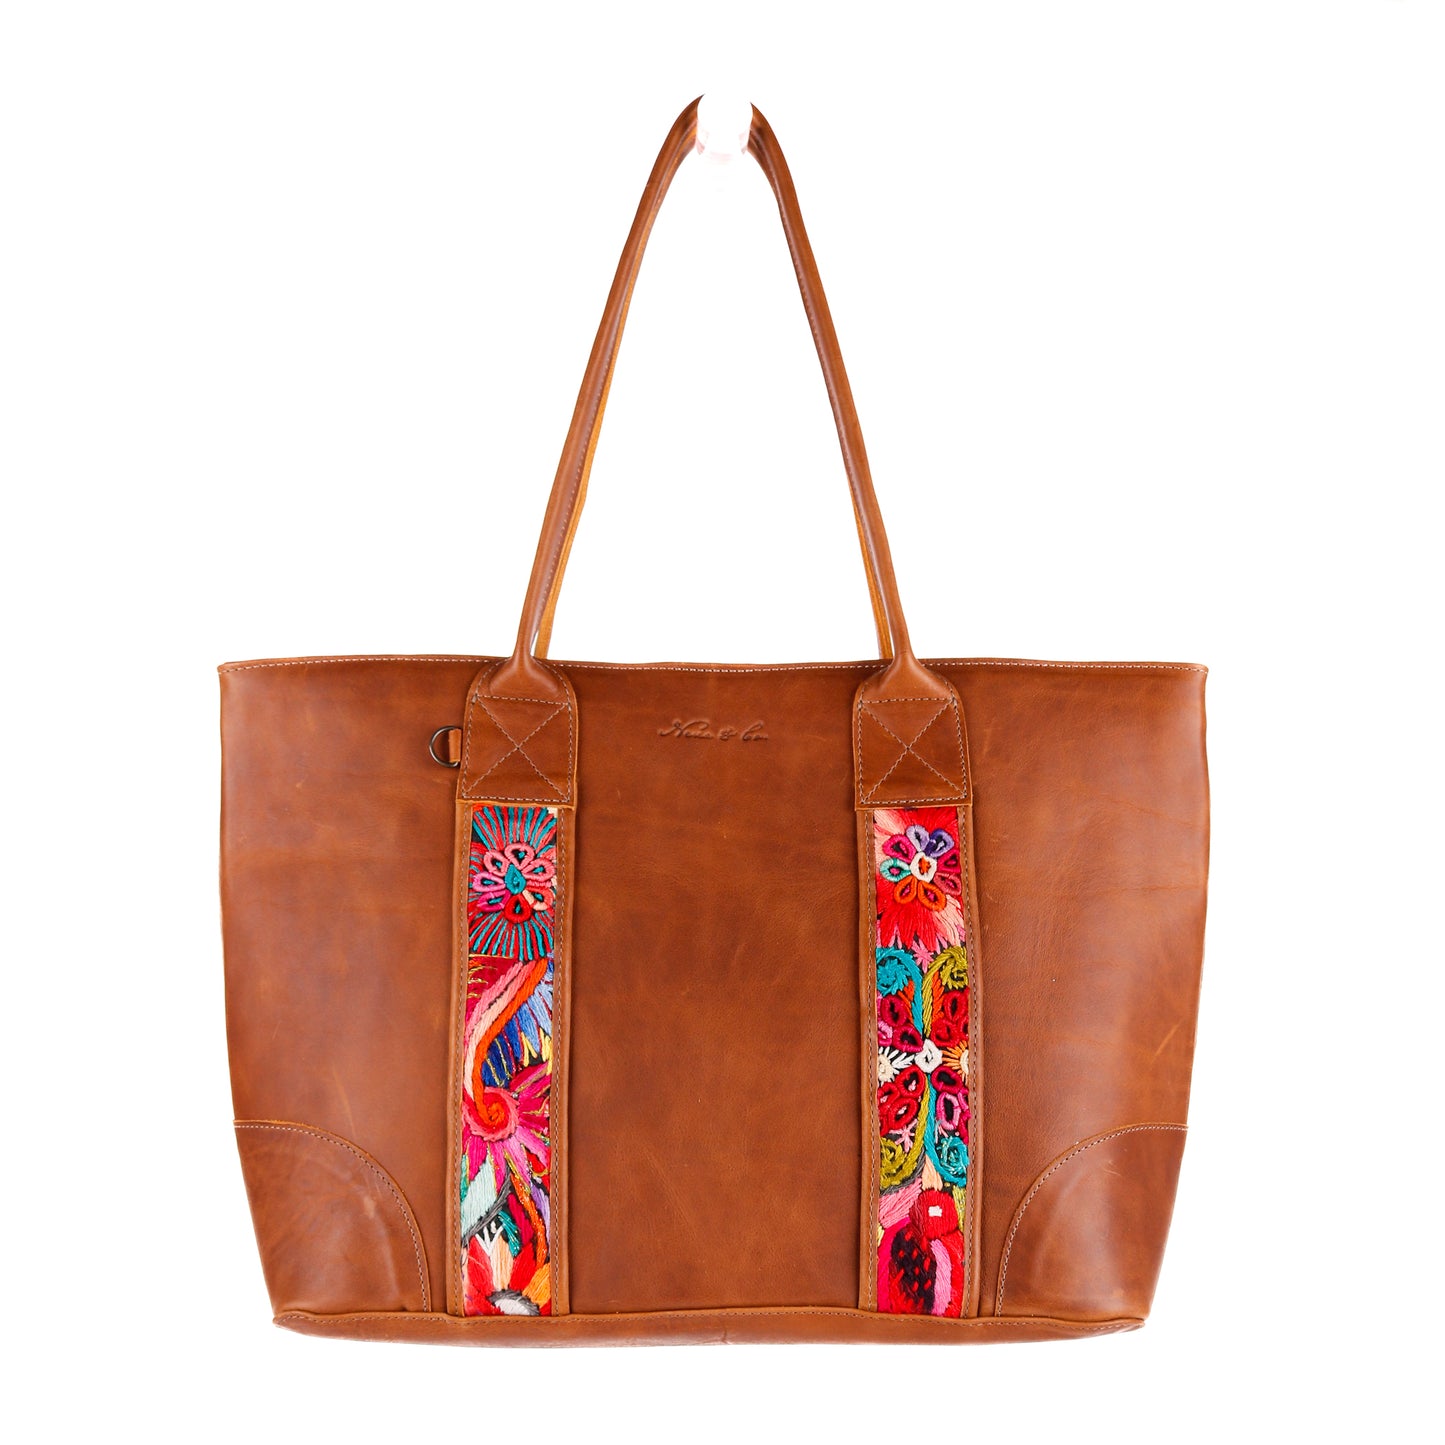 THE FOREVER TOTE - VINTAGE FAJA ACCENTS - CAFE - NO. 10694